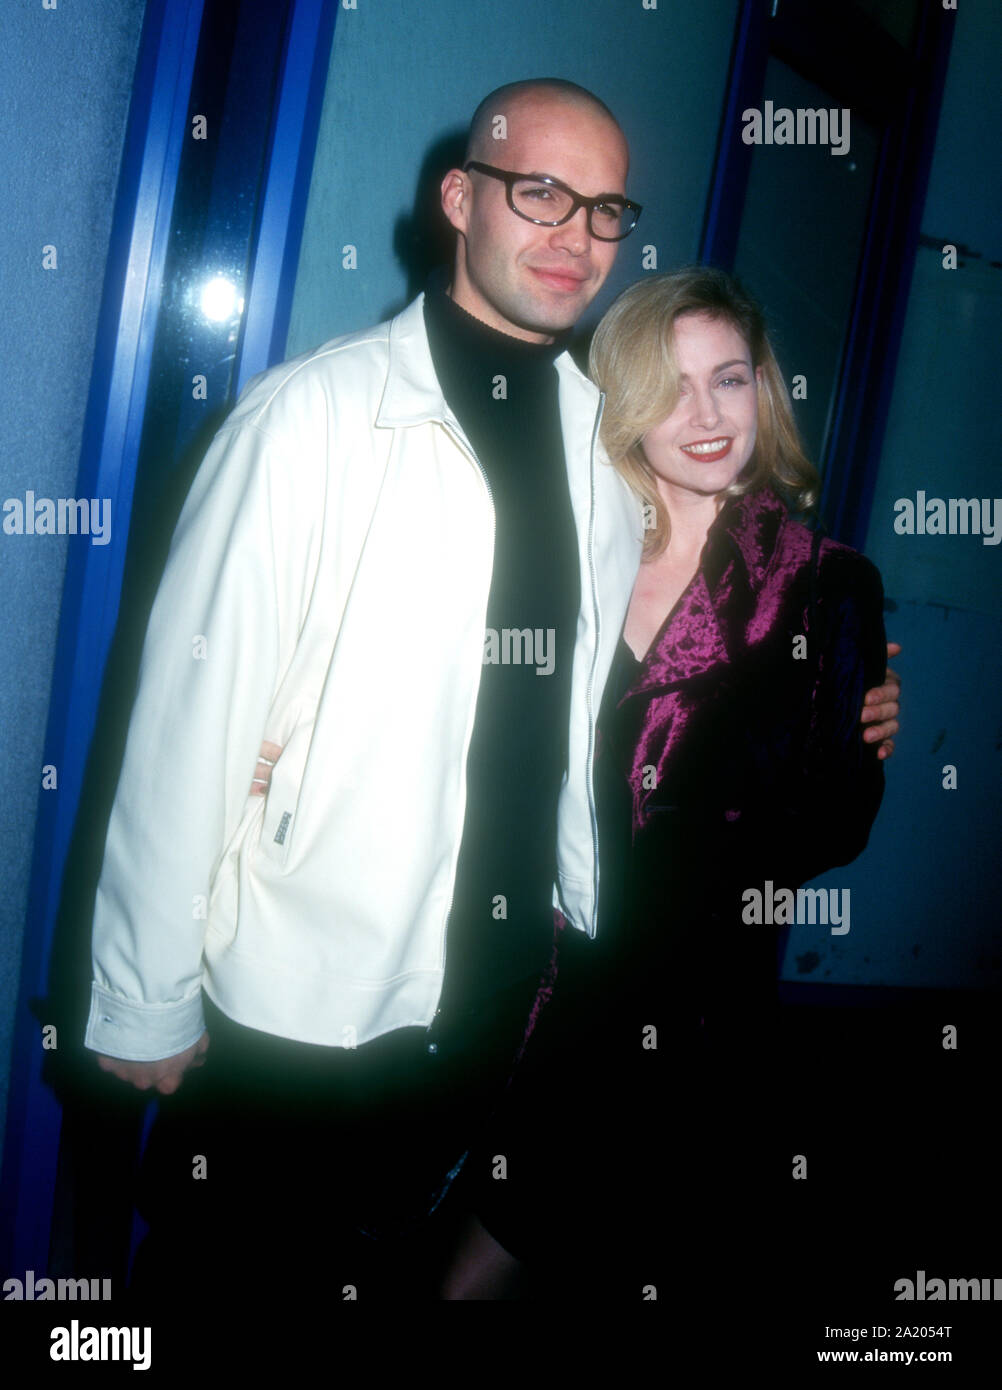 Hollywood, California, USA 11th January 1995 Actor Billy Zane and wife actress Lisa Collins attend 'Tales from the Crypt: Demon Knight' Hollywood Premiere on January 11, 1995 at Hollywood Galaxy Theatre in Hollywood, California, USA. Photo by Barry King/Alamy Stock Photo Stock Photo